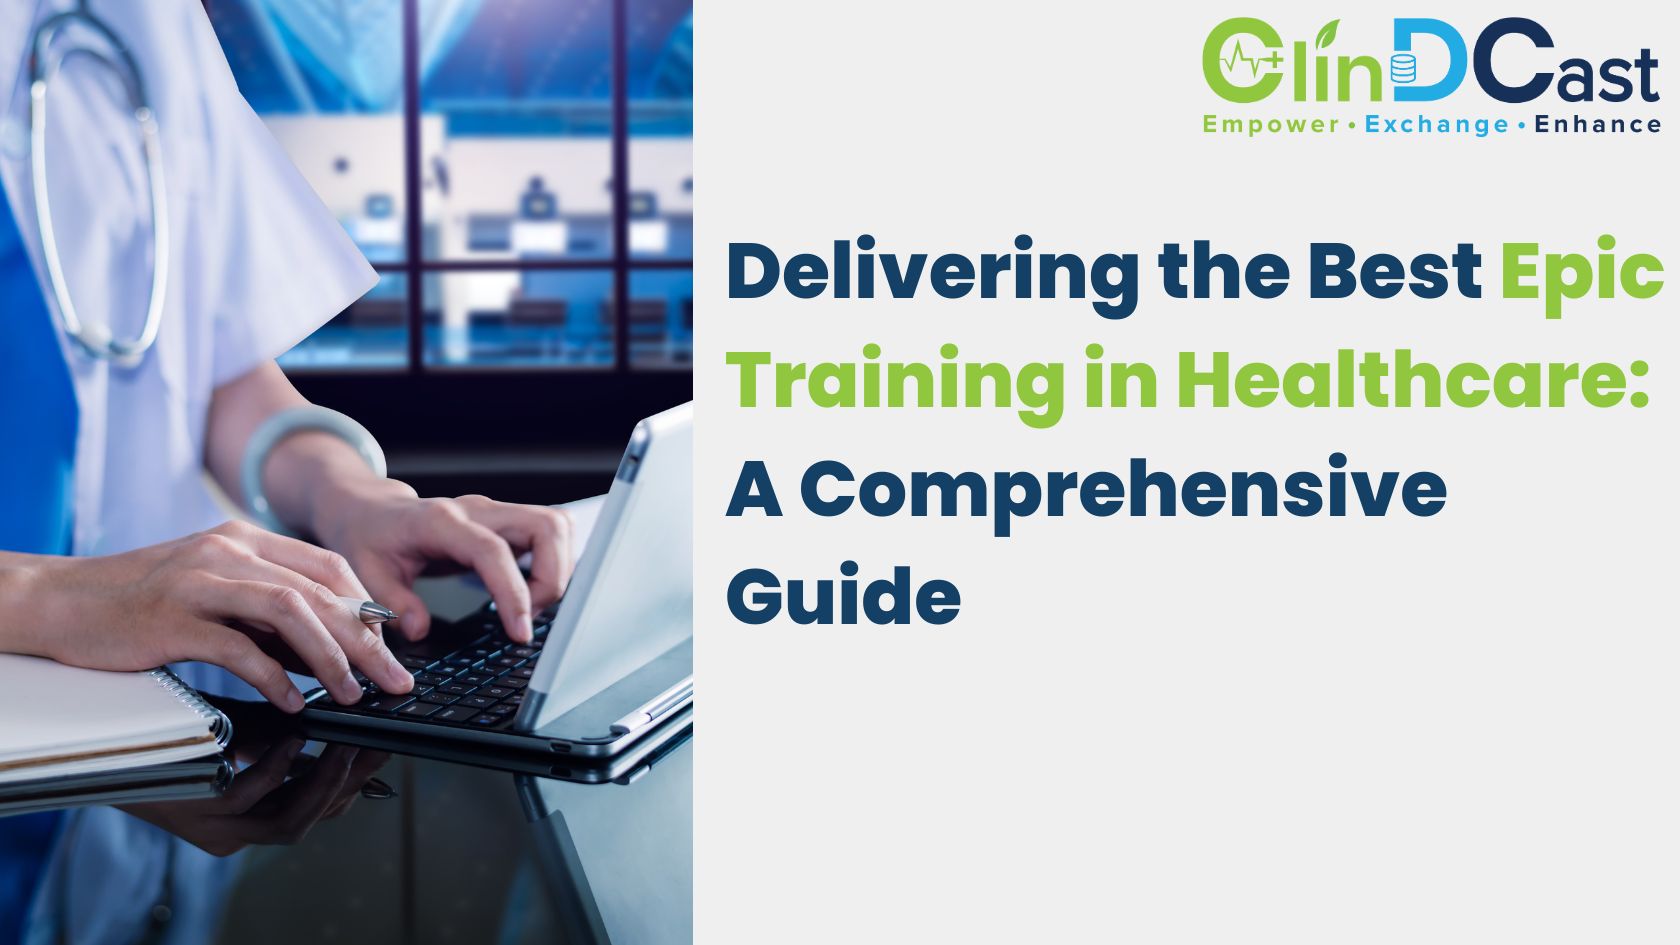 Delivering the Best Epic Training in Healthcare: A Comprehensive Guide